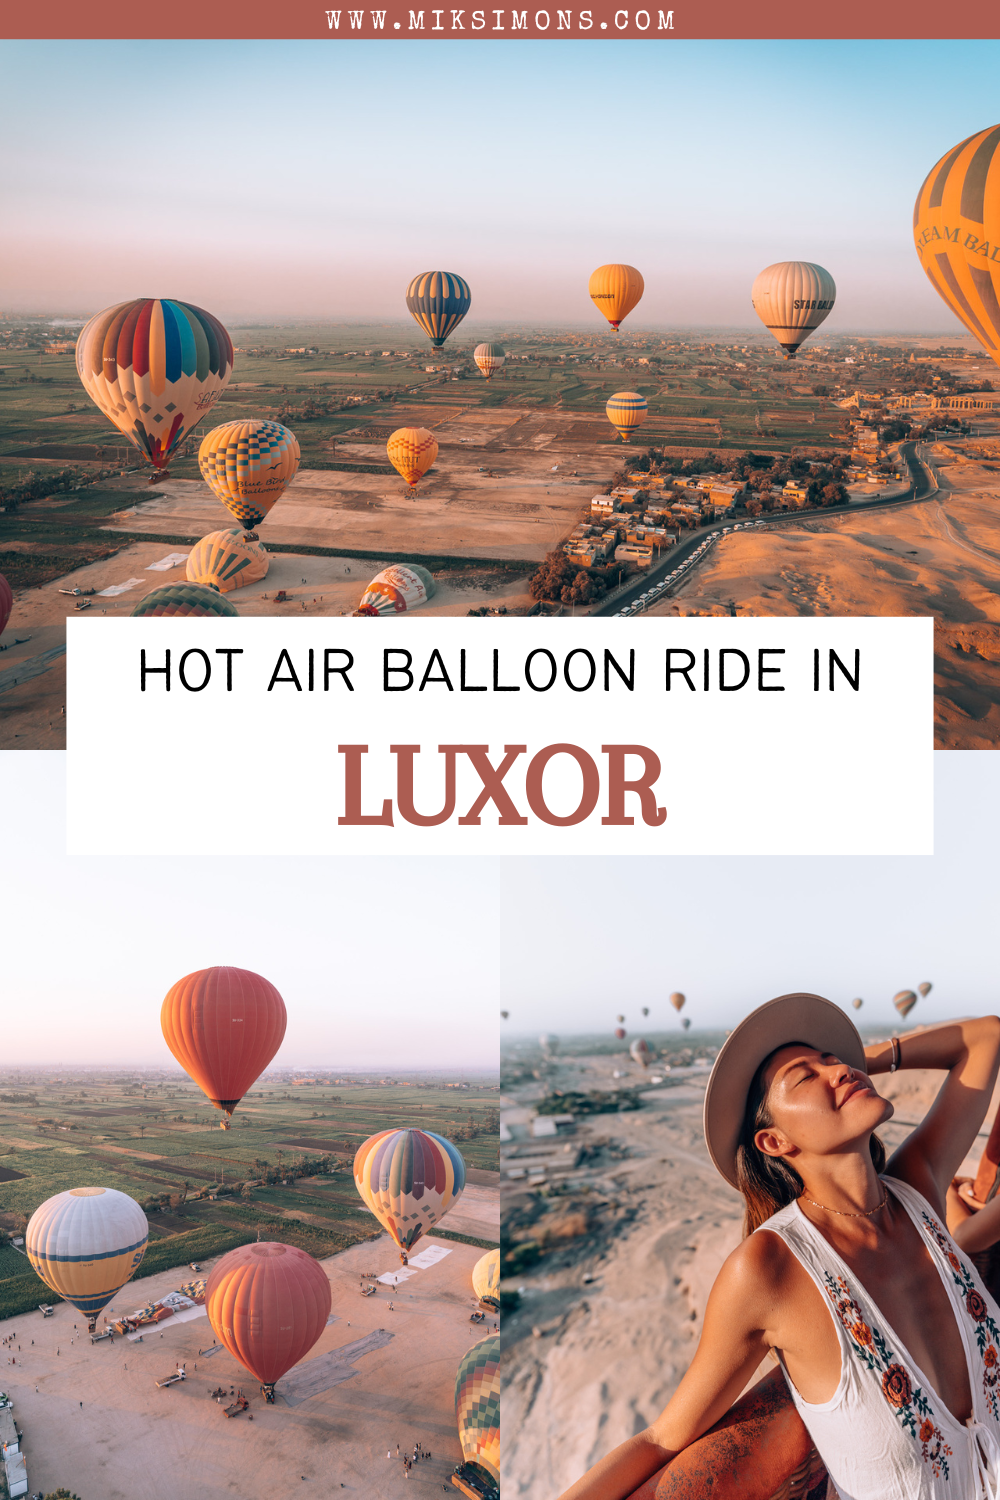 Hot air balloon ride in Luxor - Adventure in Egypt2